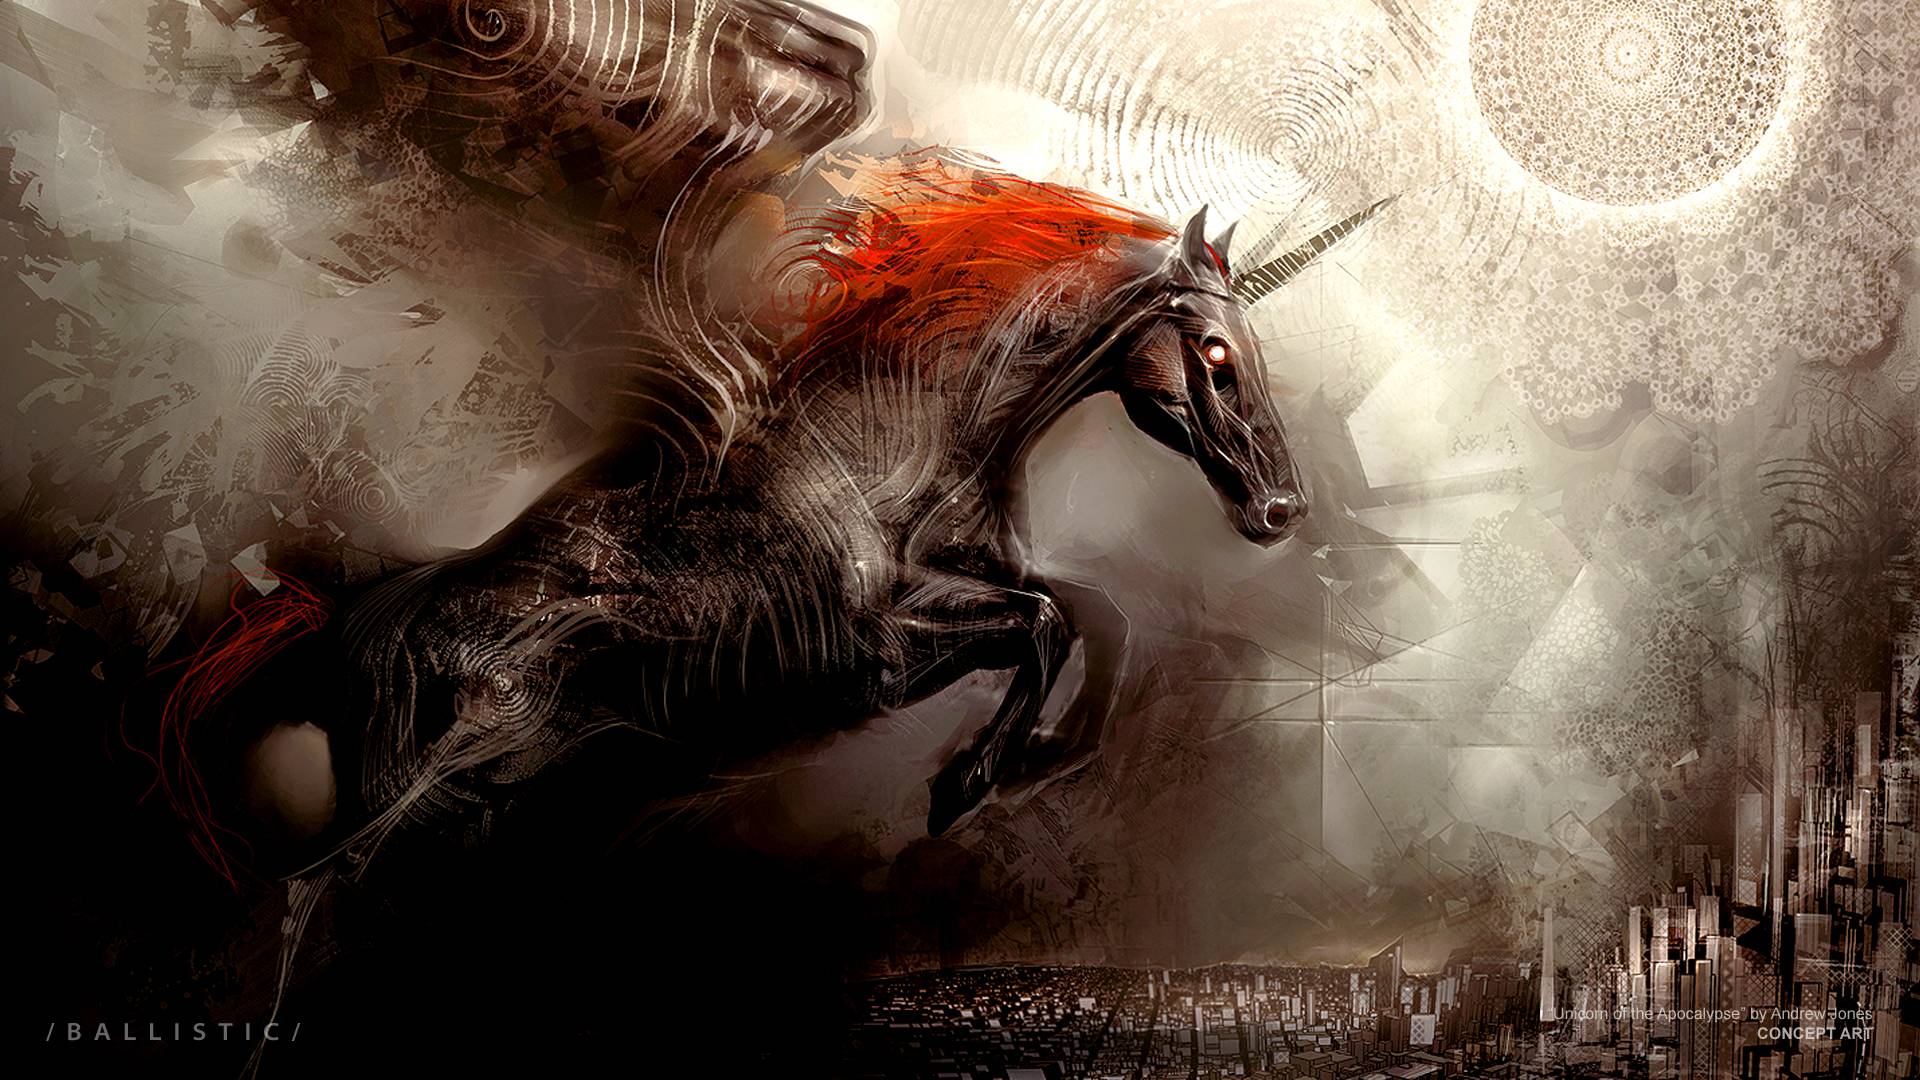 Unicorn of the Apocalypse Games Wallpaper free download high